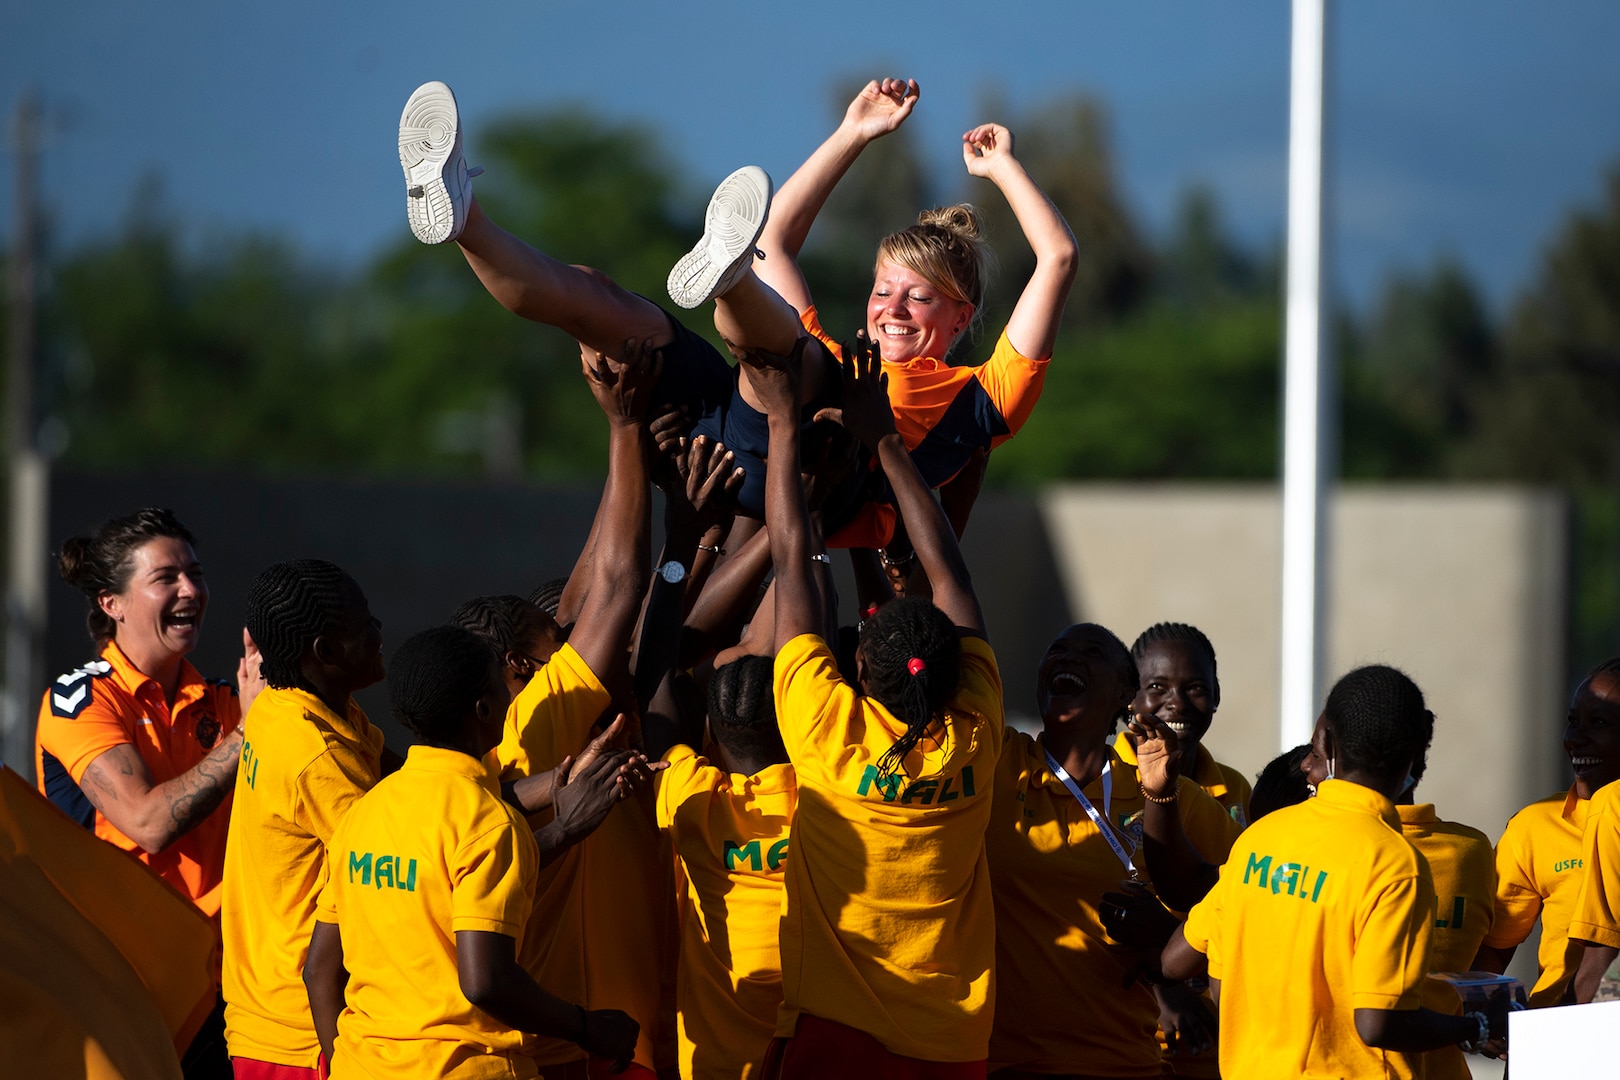 Team Mali lifts a Netherlands player during closing ceremonies for the 13th CISM (International Military Sports Council) World Military Women’s Football Championship in Meade, Washington July 22, 2022. (DoD photo by EJ Hersom)